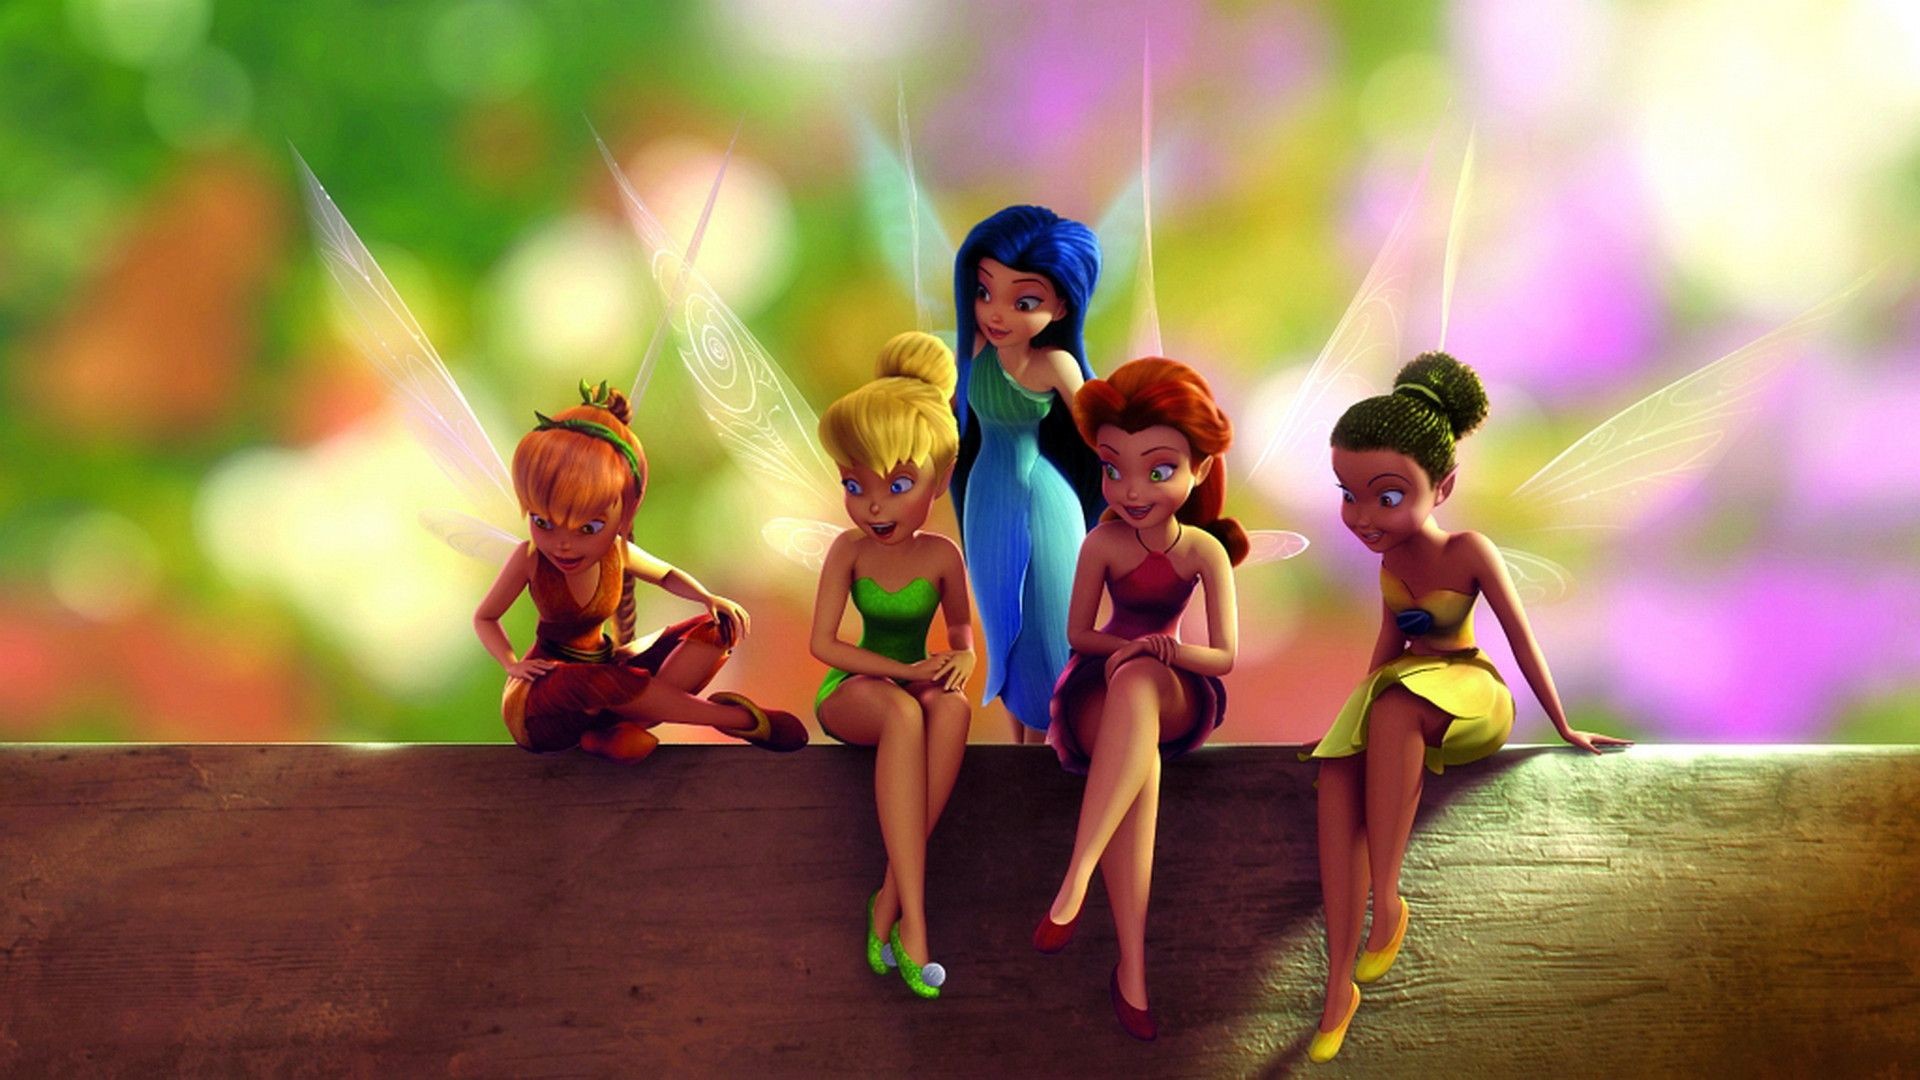 1920x1080 Tinkerbell-Gallery-for-Free-Adorable-HQFX-1920%C3%